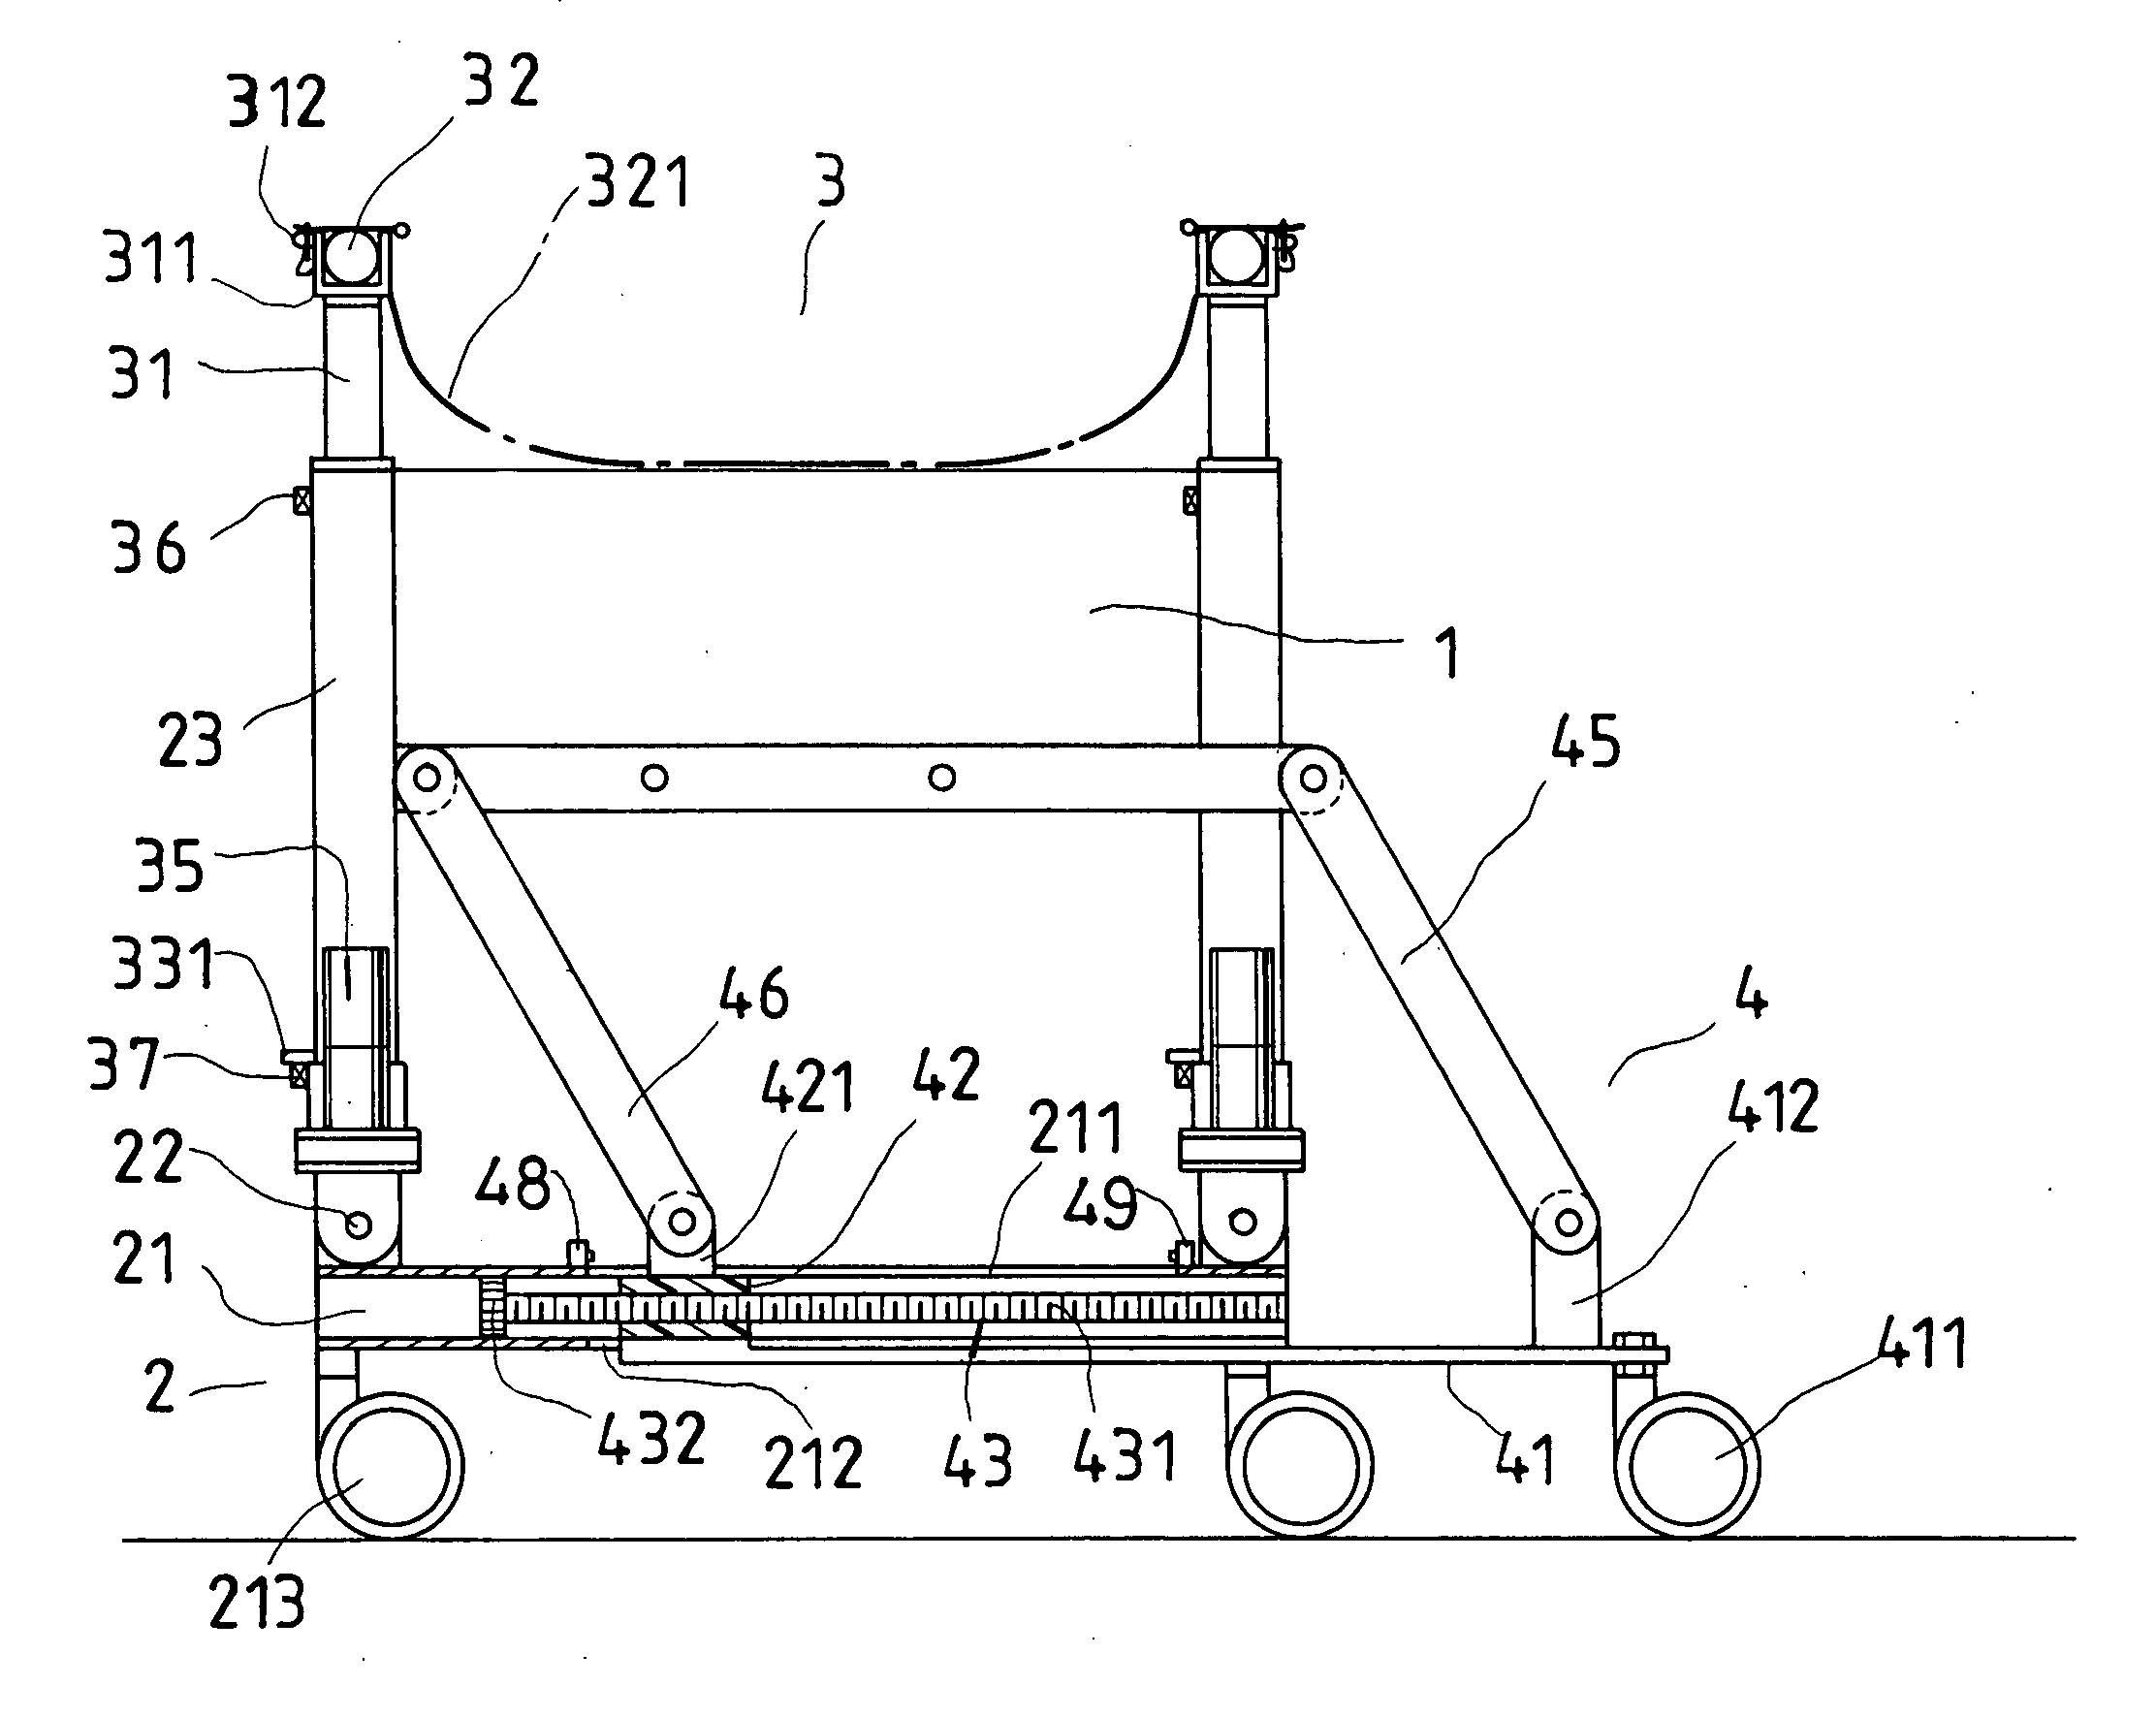 Hospital bed apparatus for turning and repositioning plus shifting a patient to another bed